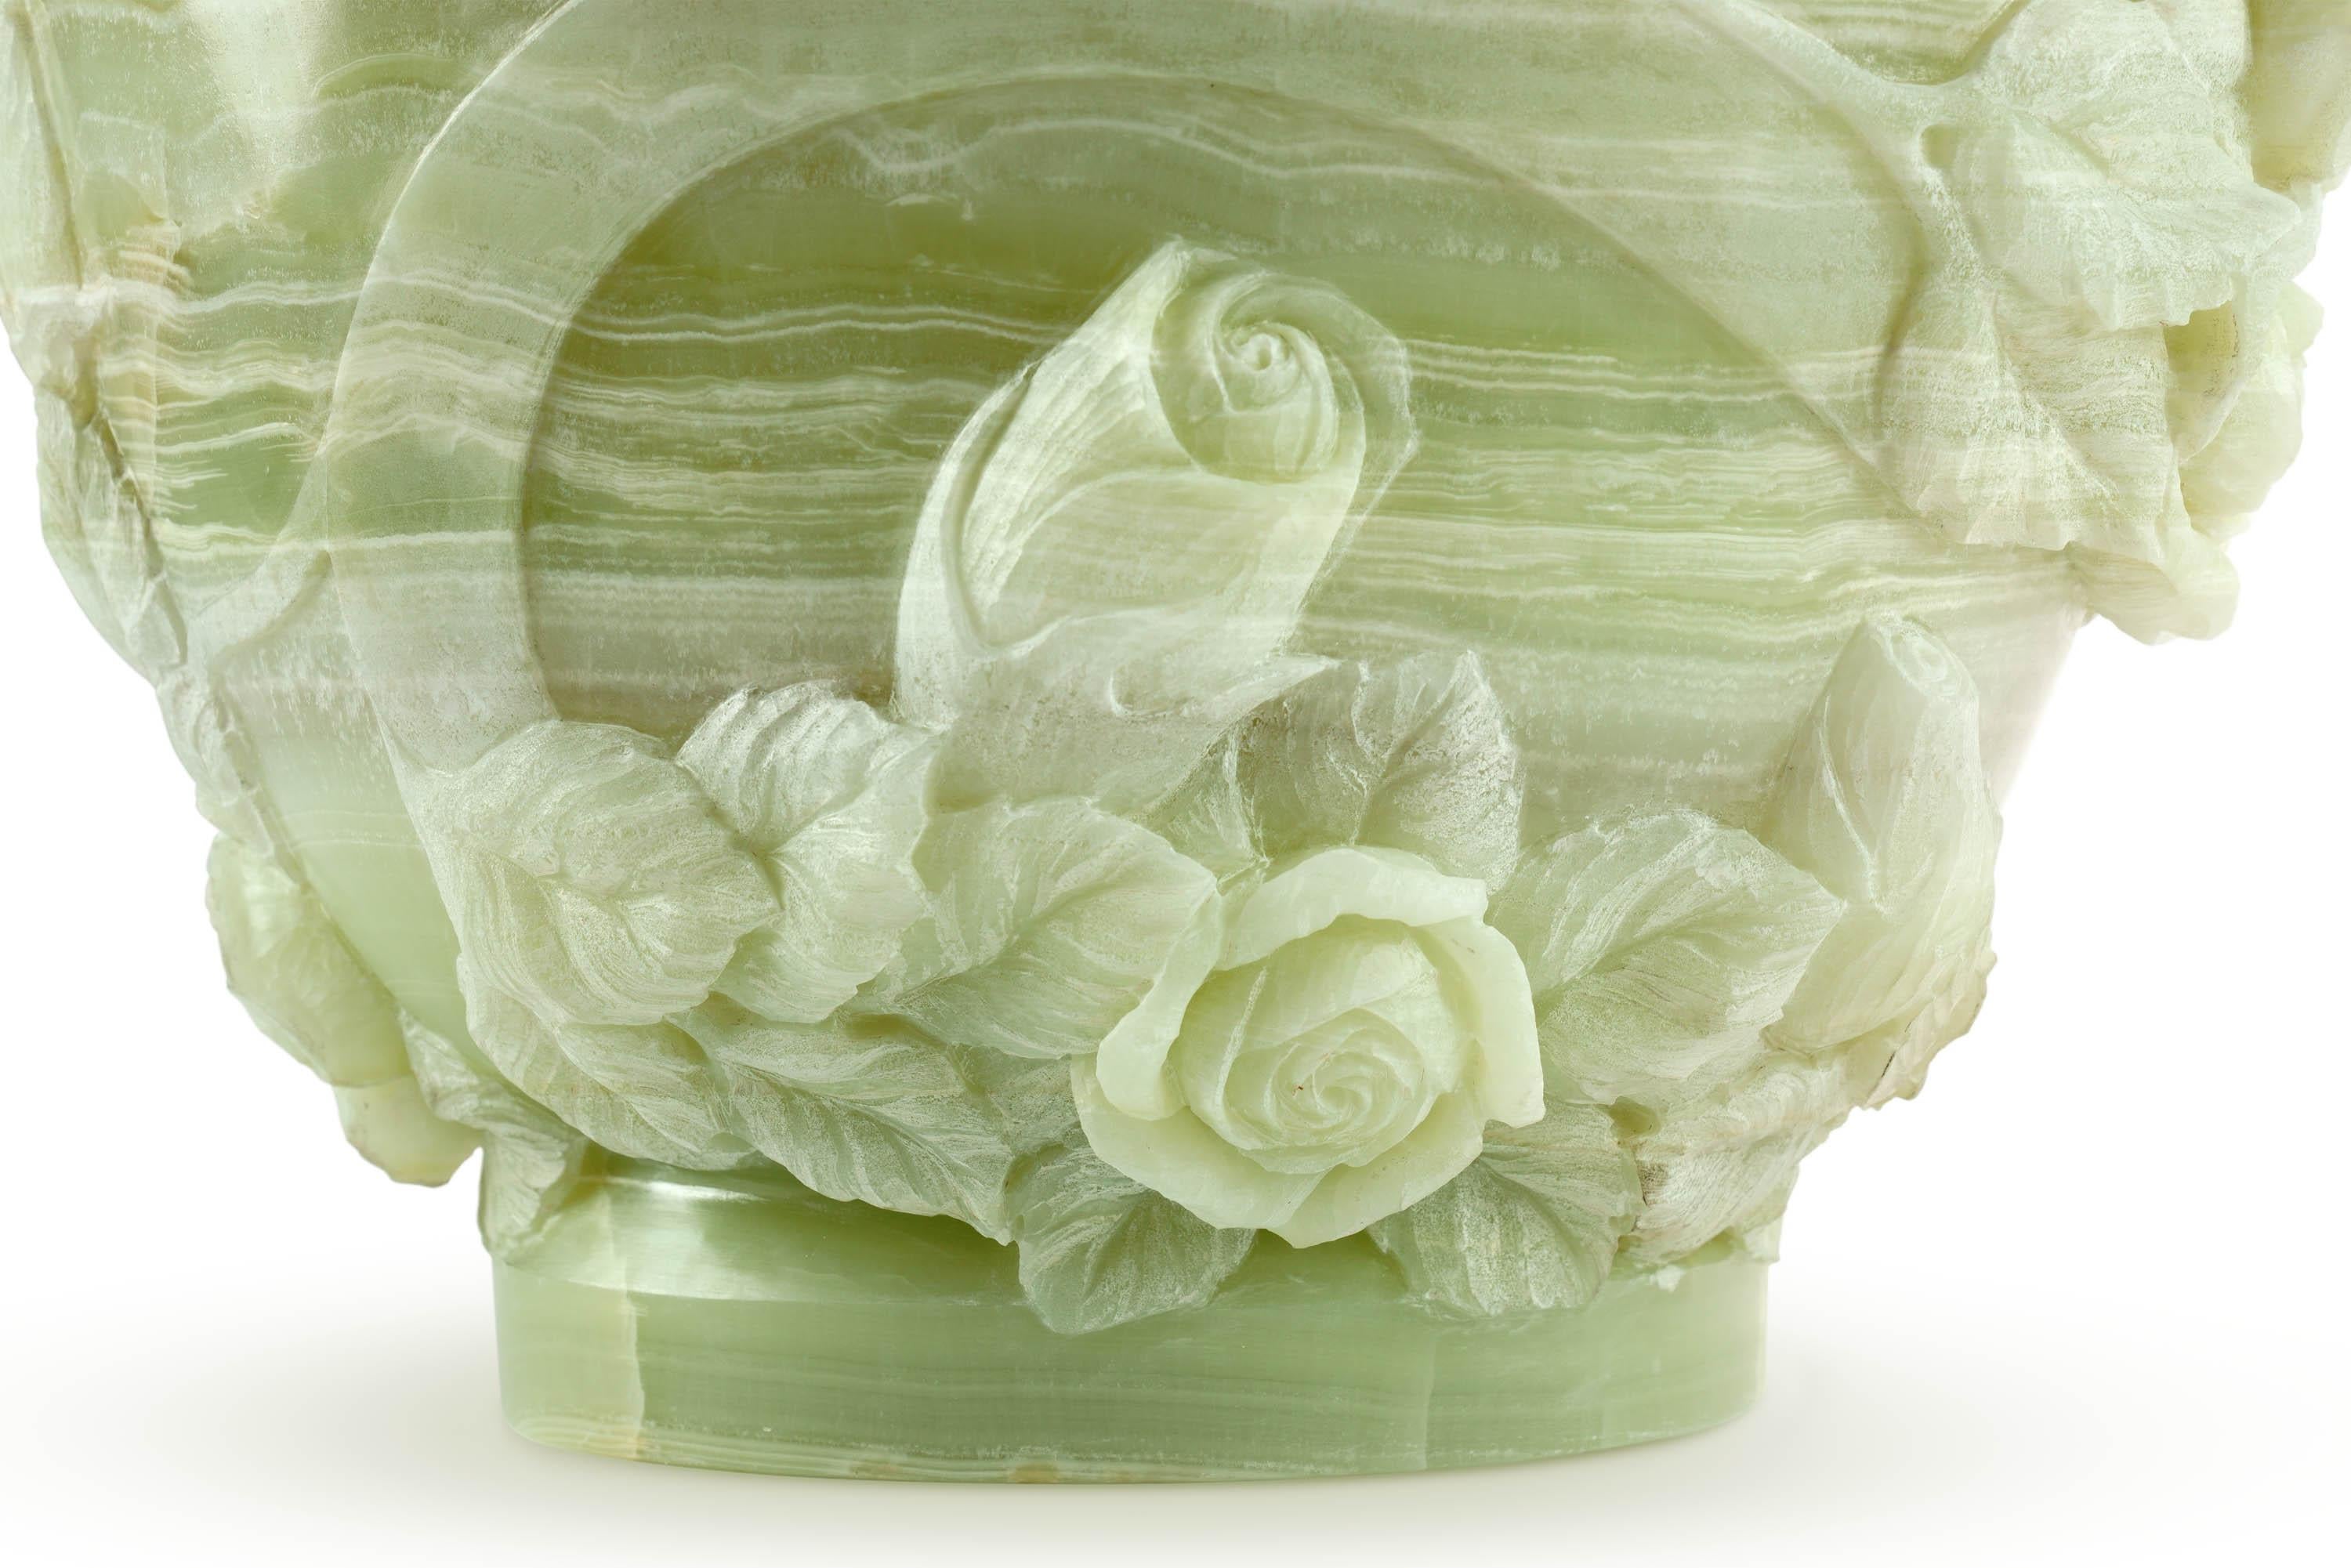 Contemporary Majestic Green Onyx Sculpture Vase Subjects Roses Leaves Hand Carved in Italy For Sale